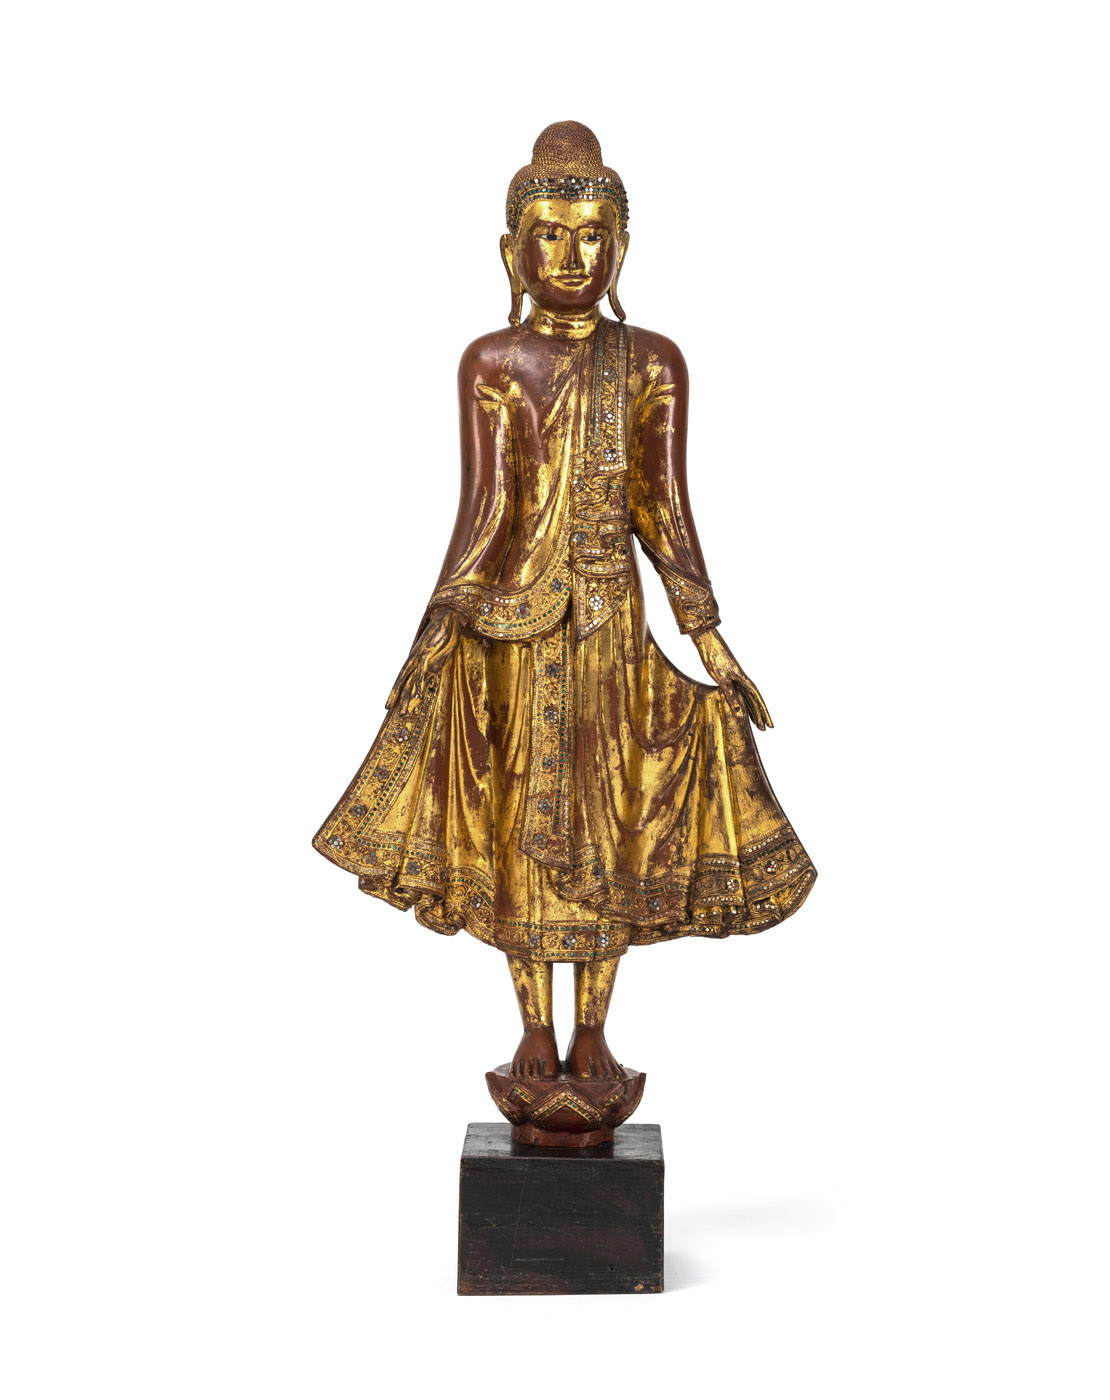 <b>STANDING BUDDHA MADE OF WOOD WITH GOLD LACQUER AND SMALL INLAID MIRRORS</b>